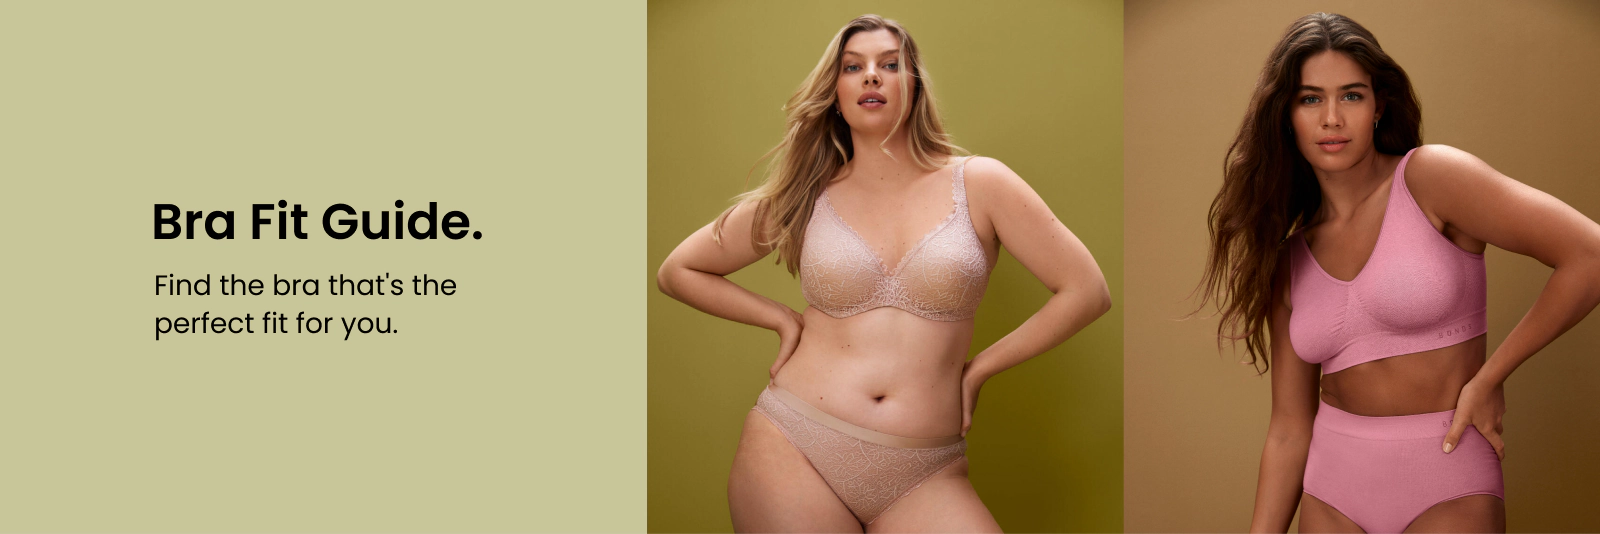 Bra Cup Sizing Chart: Find the Perfect Fit for Your Body Shape